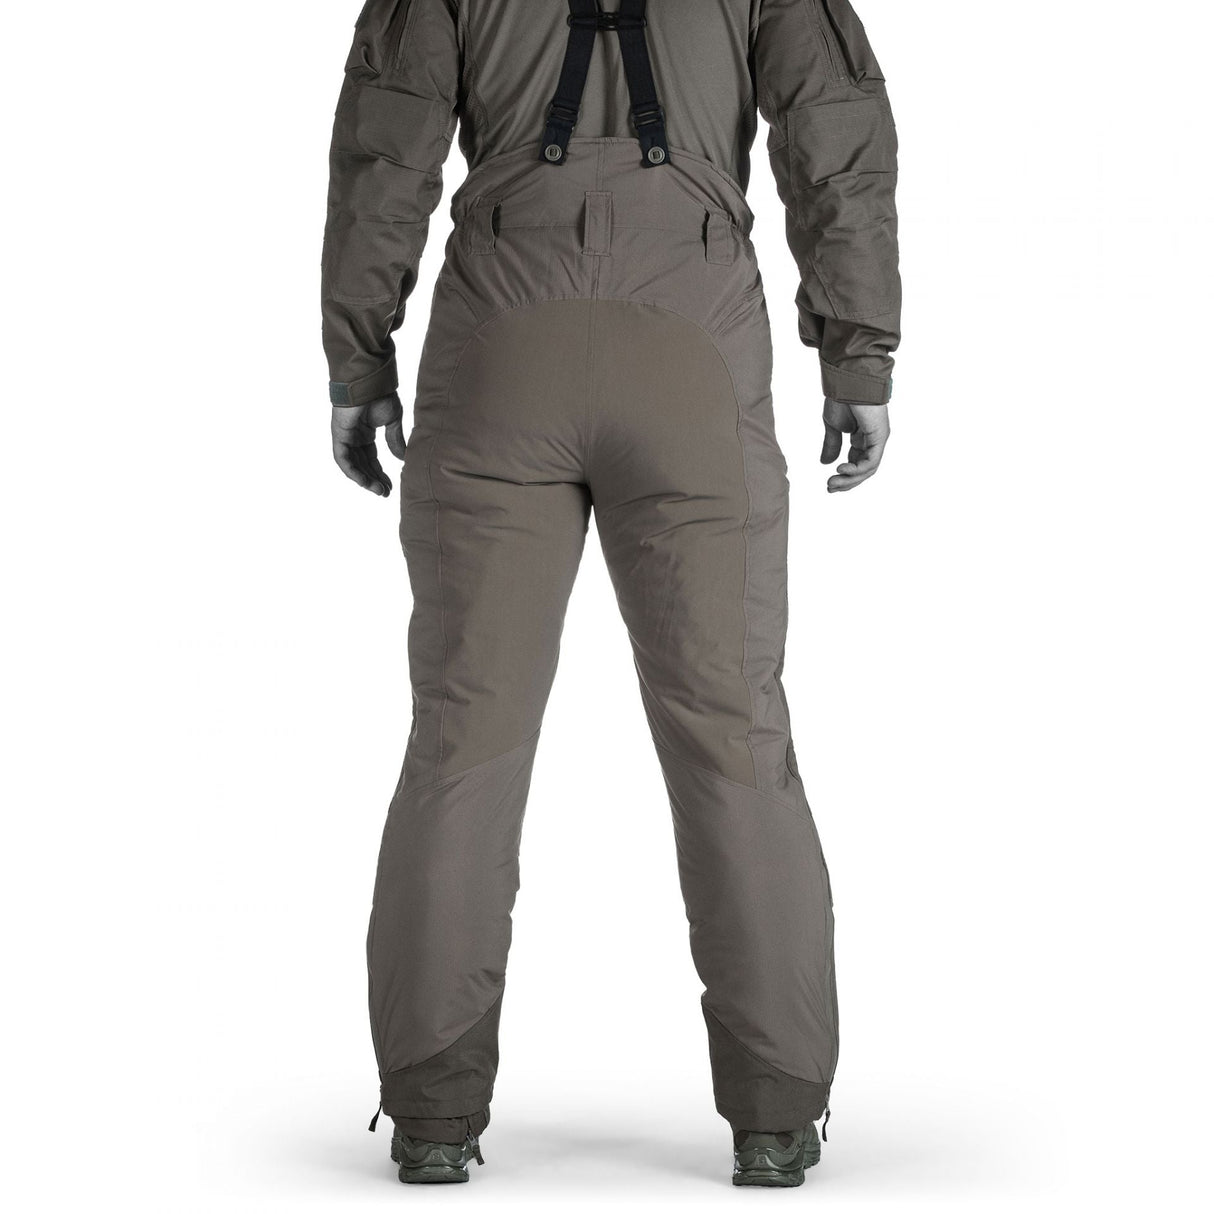 Tactical Cold Weather Pants: Flex/Zone construction, adjustable fit, fleece-lined pockets.